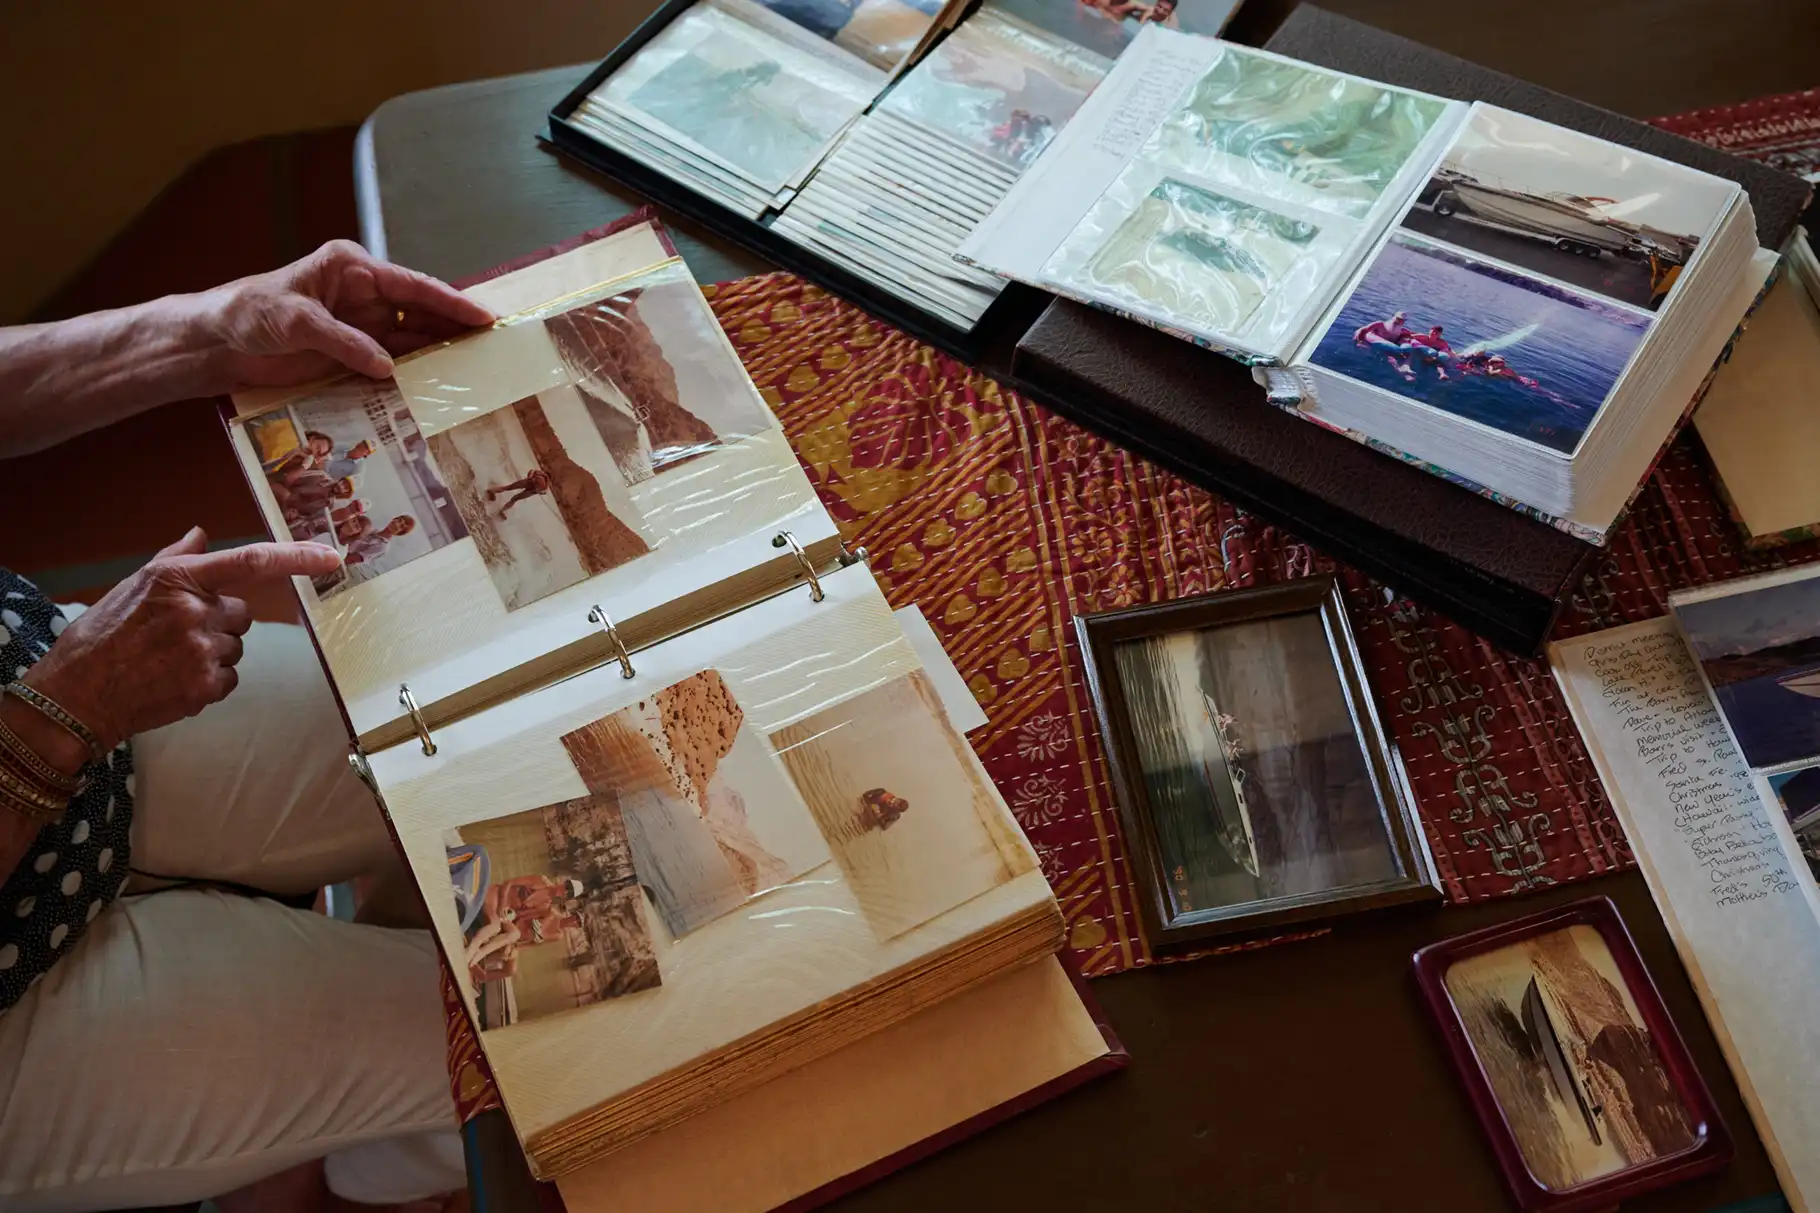 Dimeno flips through Browning's photo album of memories of his time at Lake Mead.